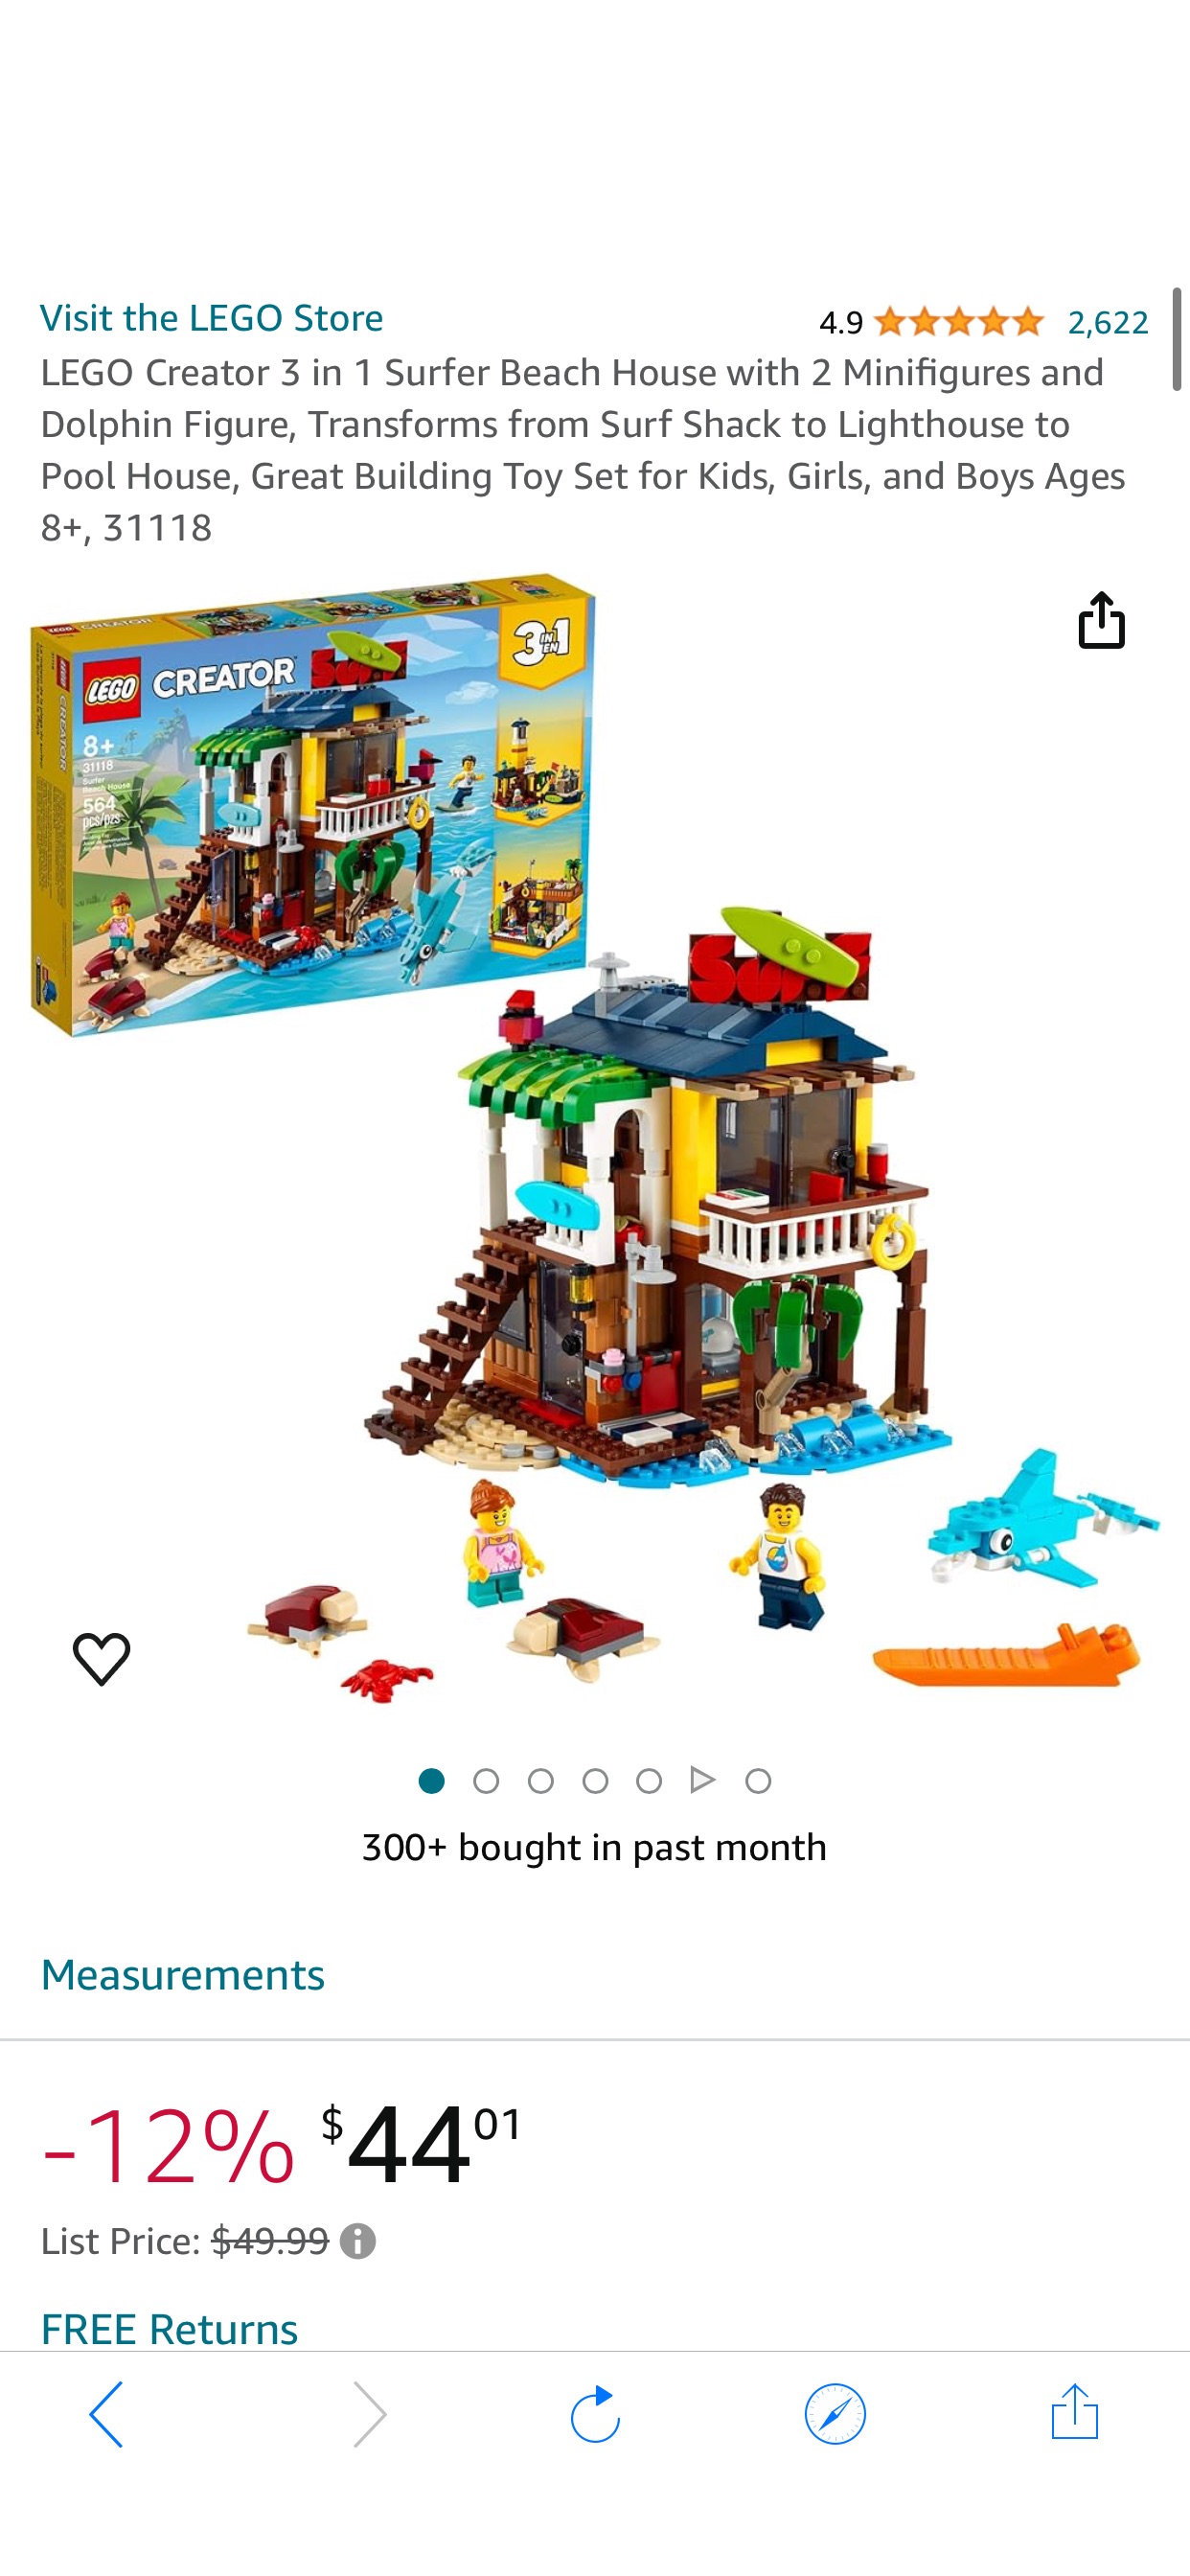 Amazon.com: LEGO Creator 3 in 1 Surfer Beach House with 2 Minifigures and Dolphin Figure, Transforms from Surf Shack to Lighthouse to Pool House, Great Building Toy Set for Kids, Girls, and Boys Ages 